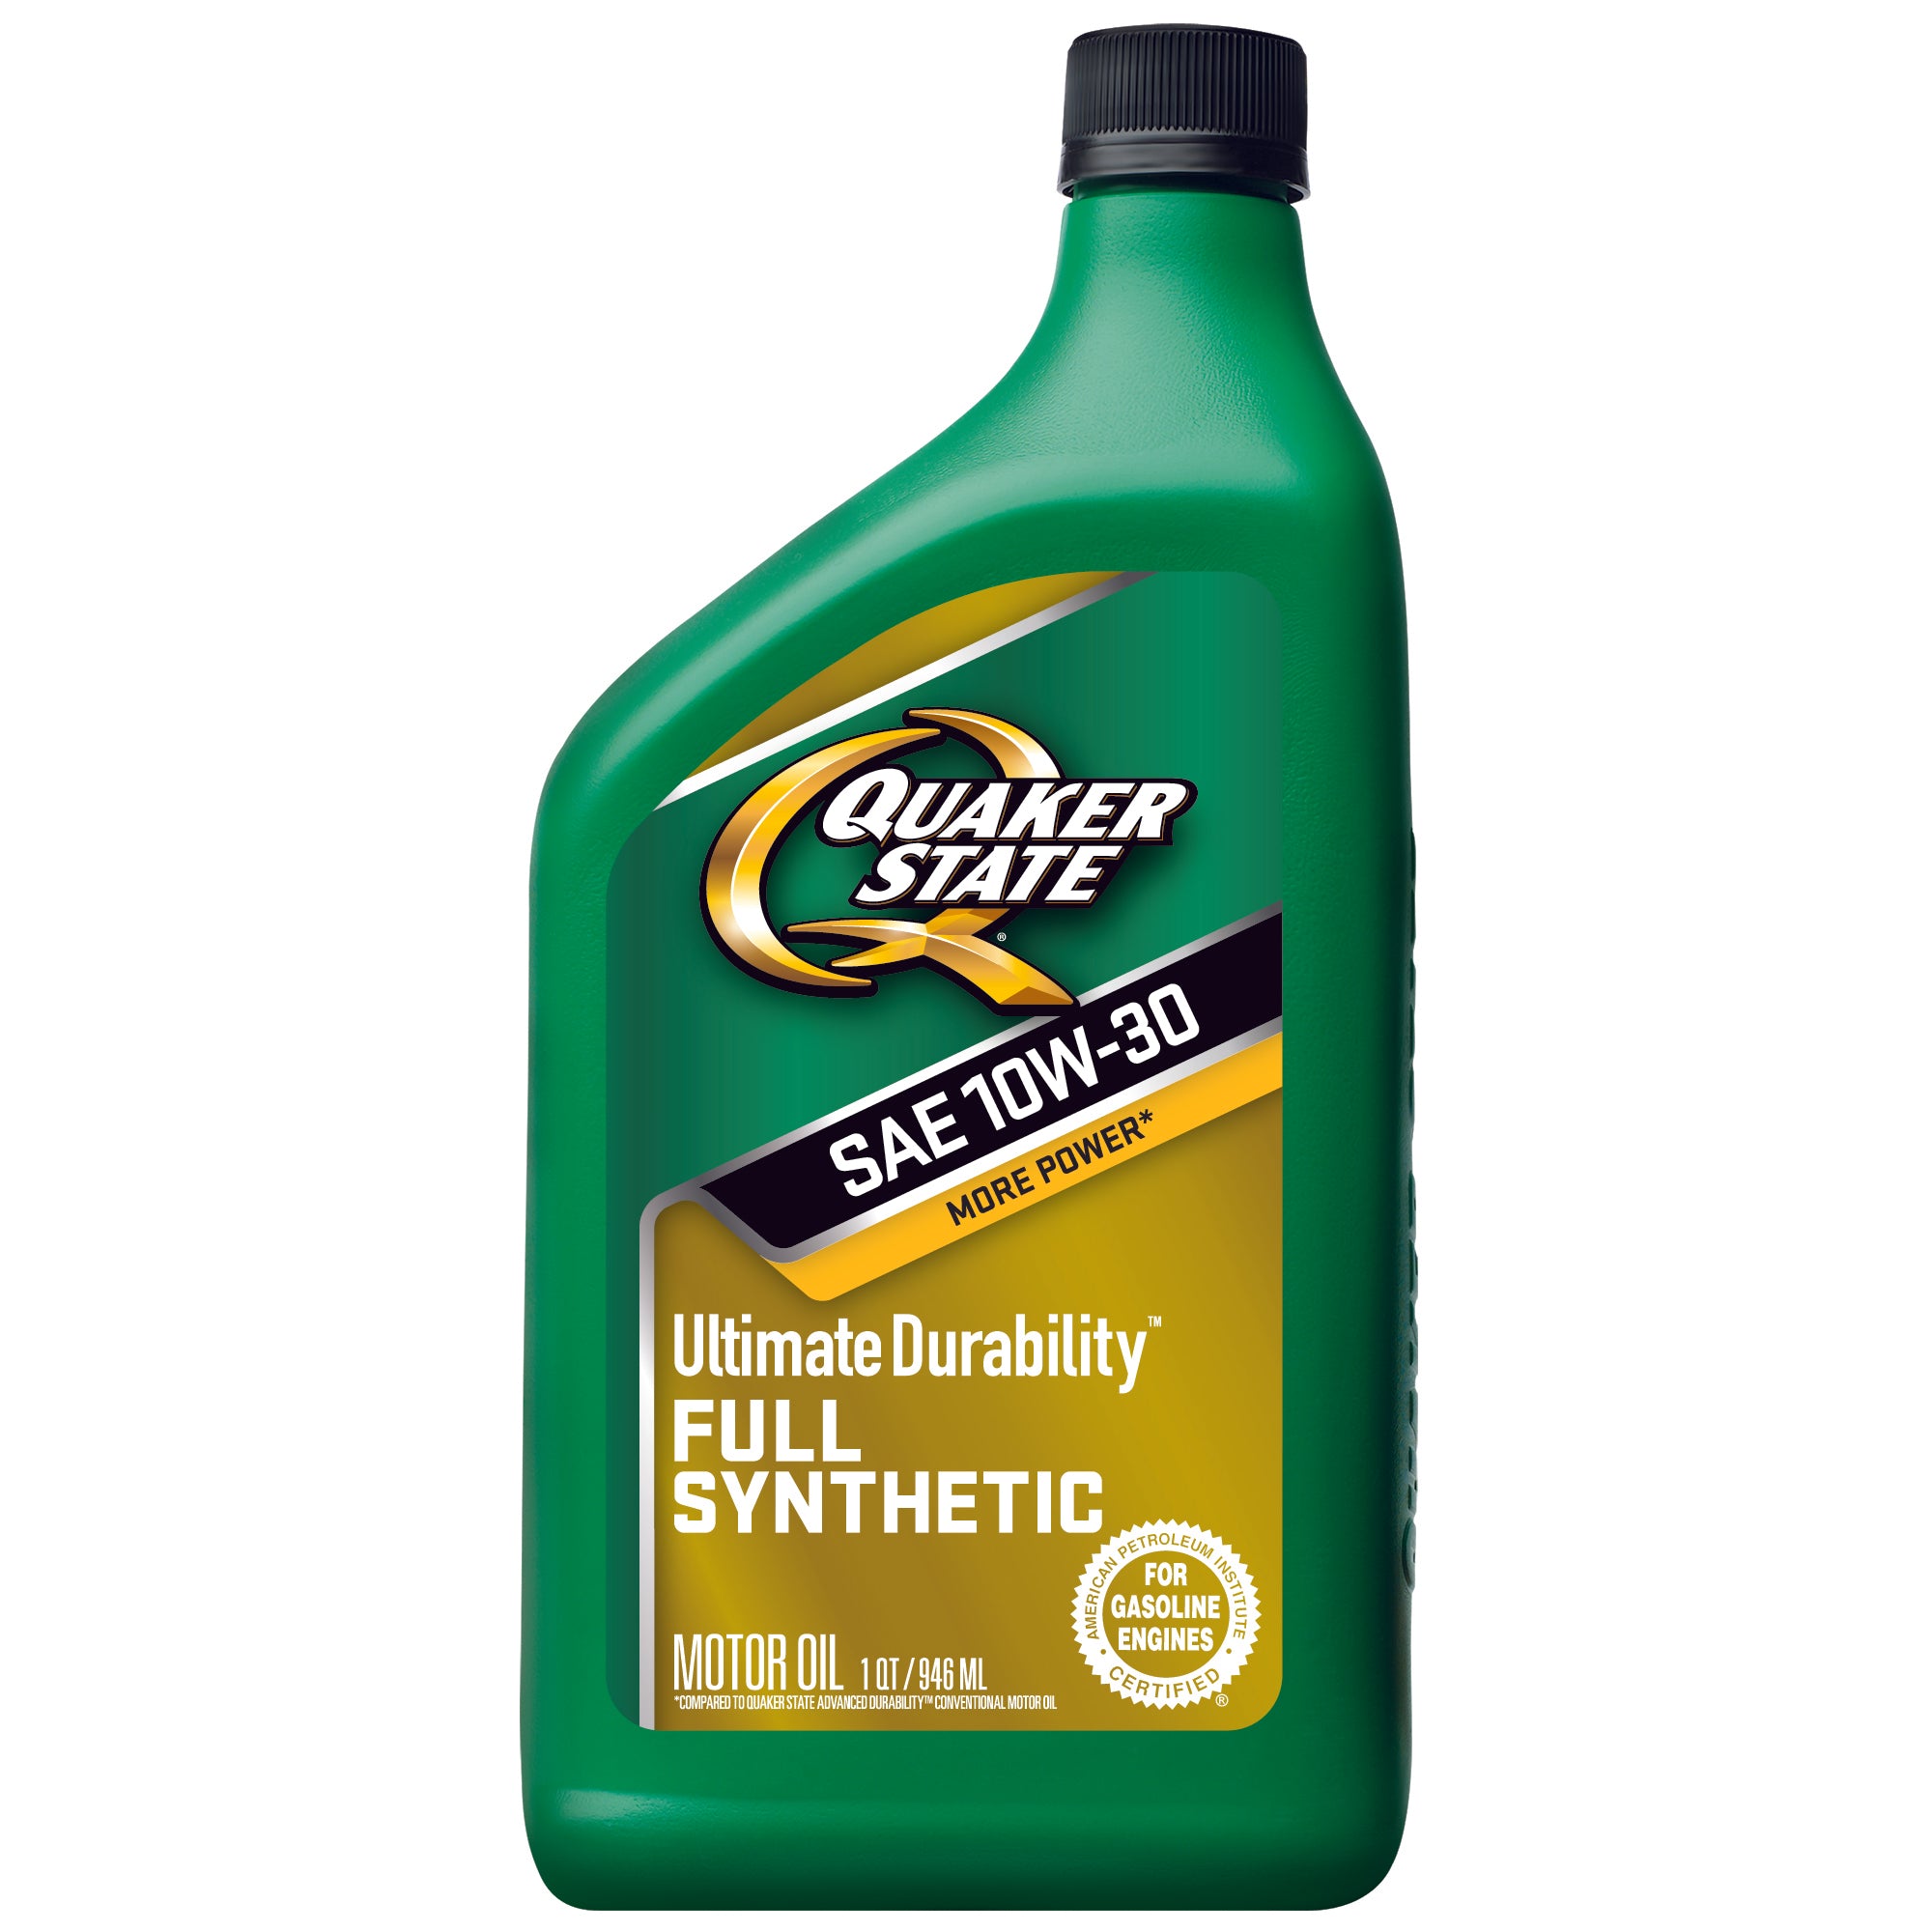 Quaker State Ultimate Durability SAE 10W 30 Full Synthetic Motor Oil Case of 6 1 qt